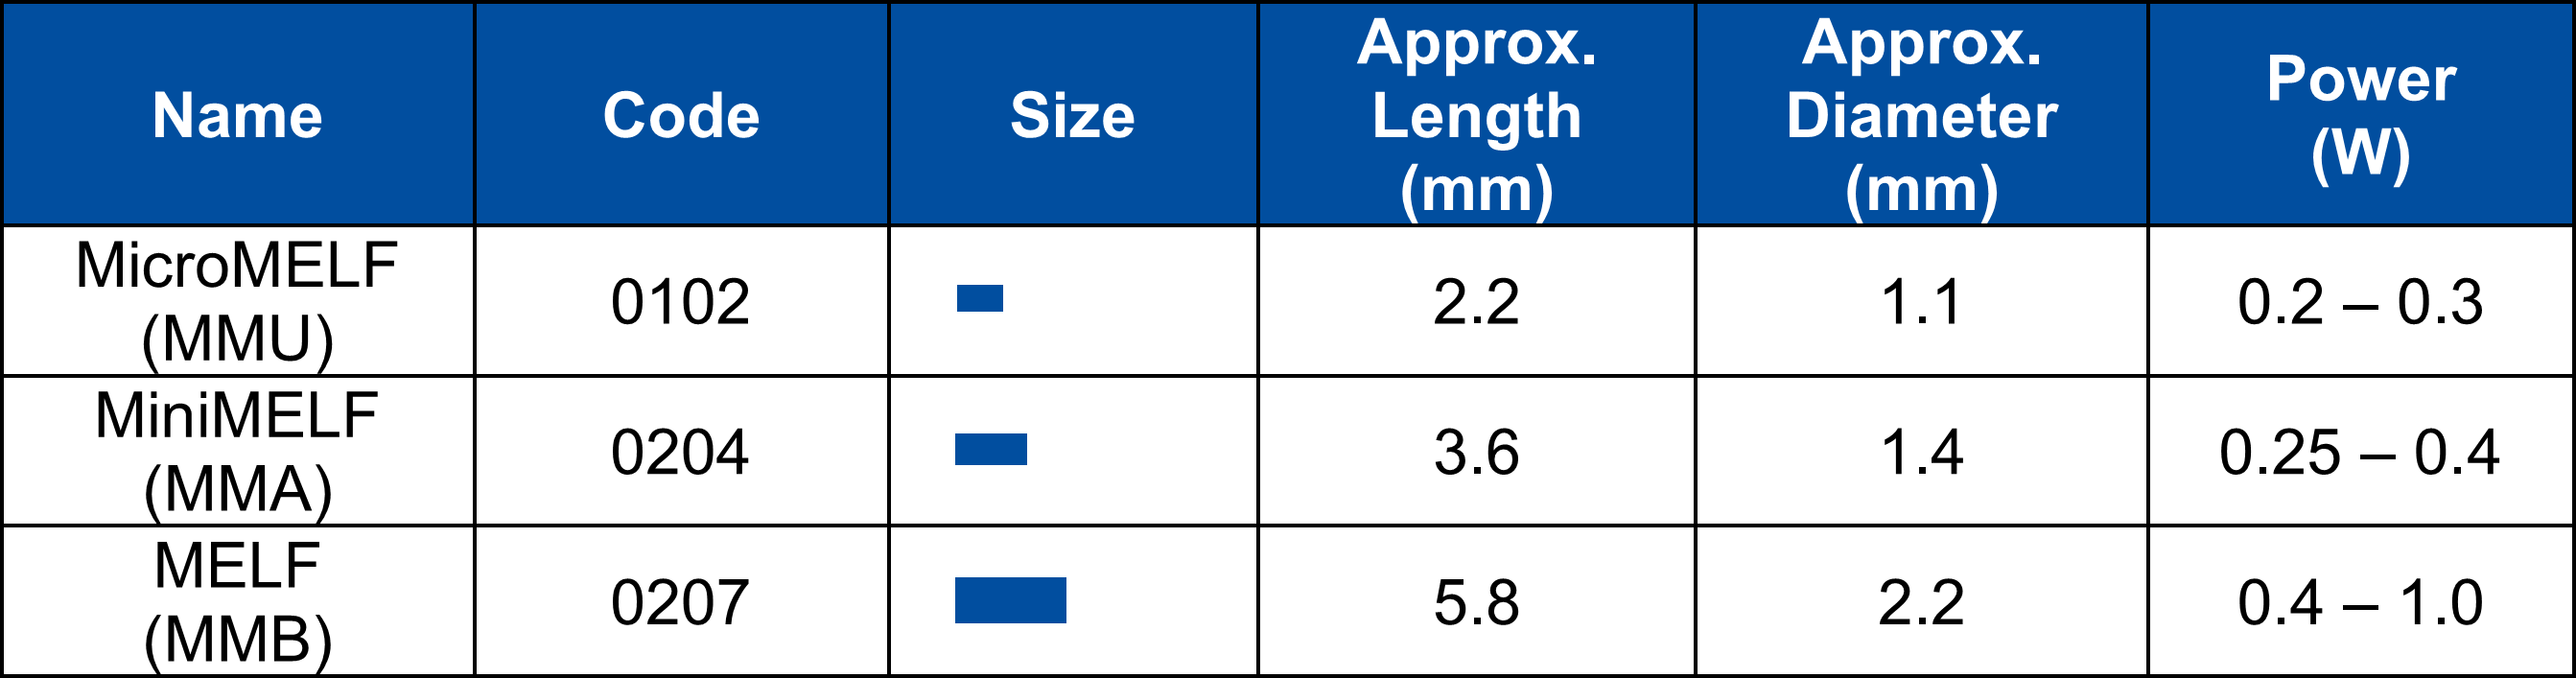 Guide to Resistor Sizes and Packages